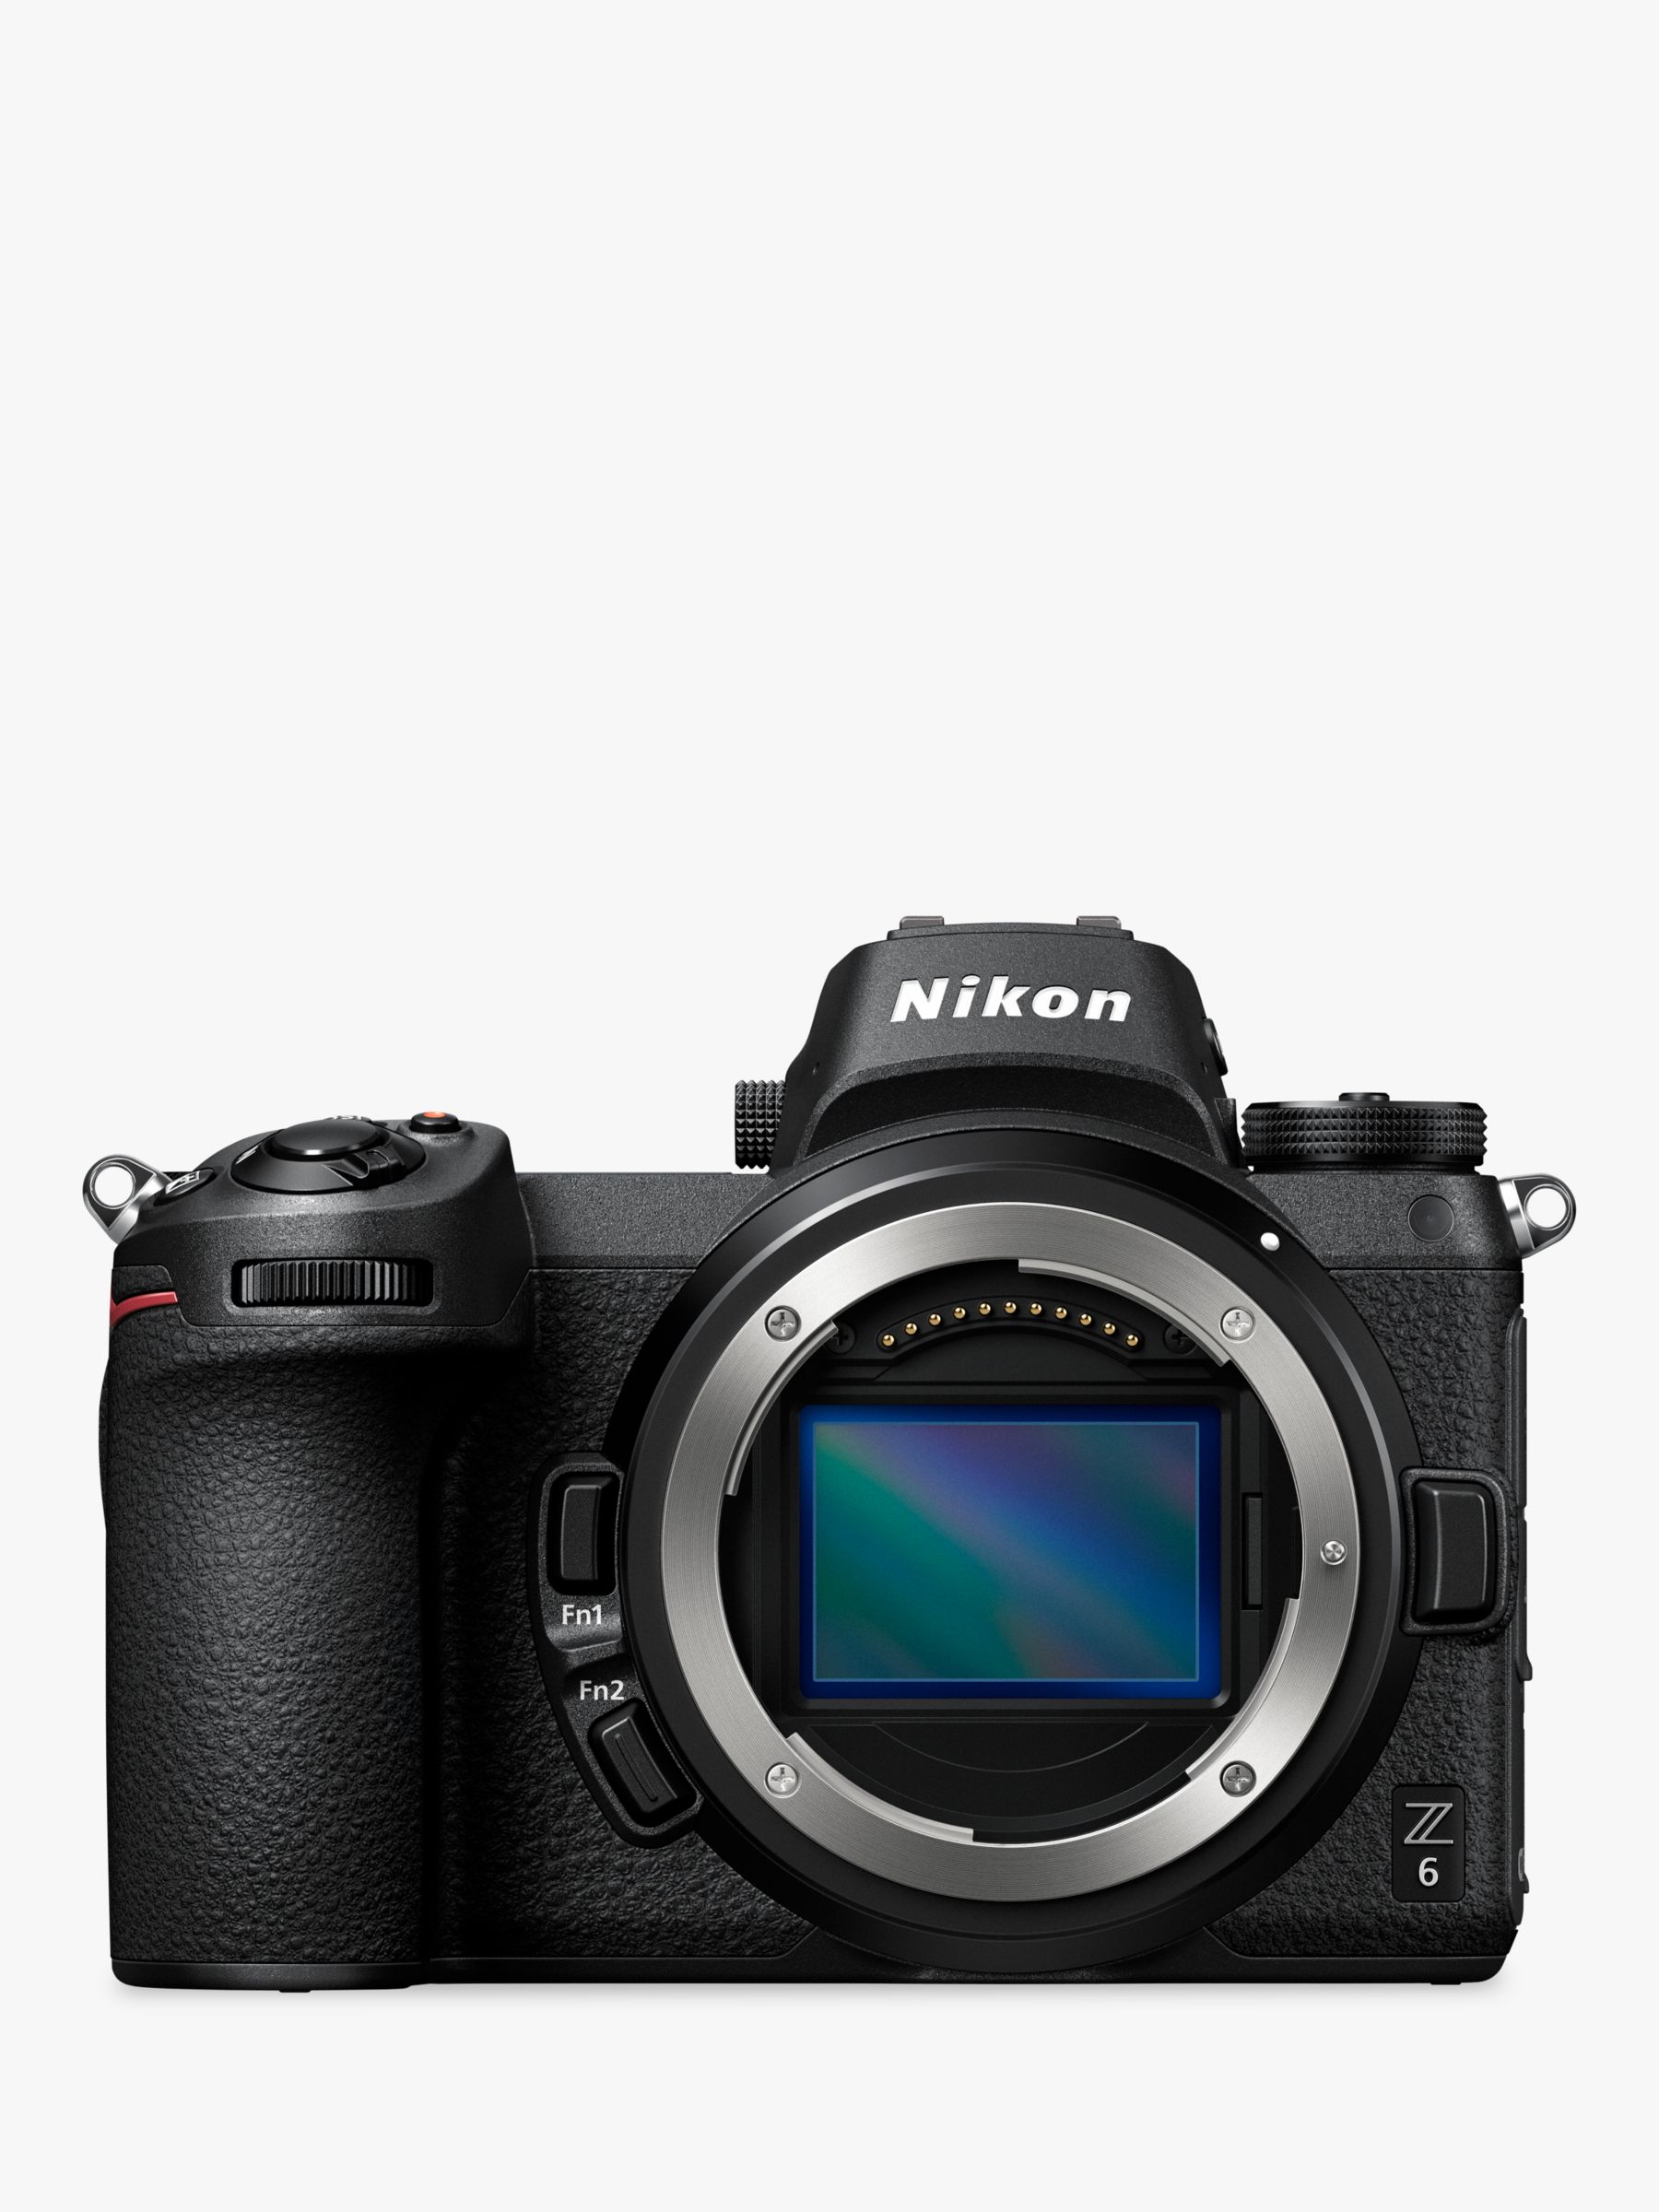 Image of Nikon Z6 Compact System Camera 4K UHD 245MP WiFi Bluetooth OLED EVF 32 Tiltable Touch Screen Body Only